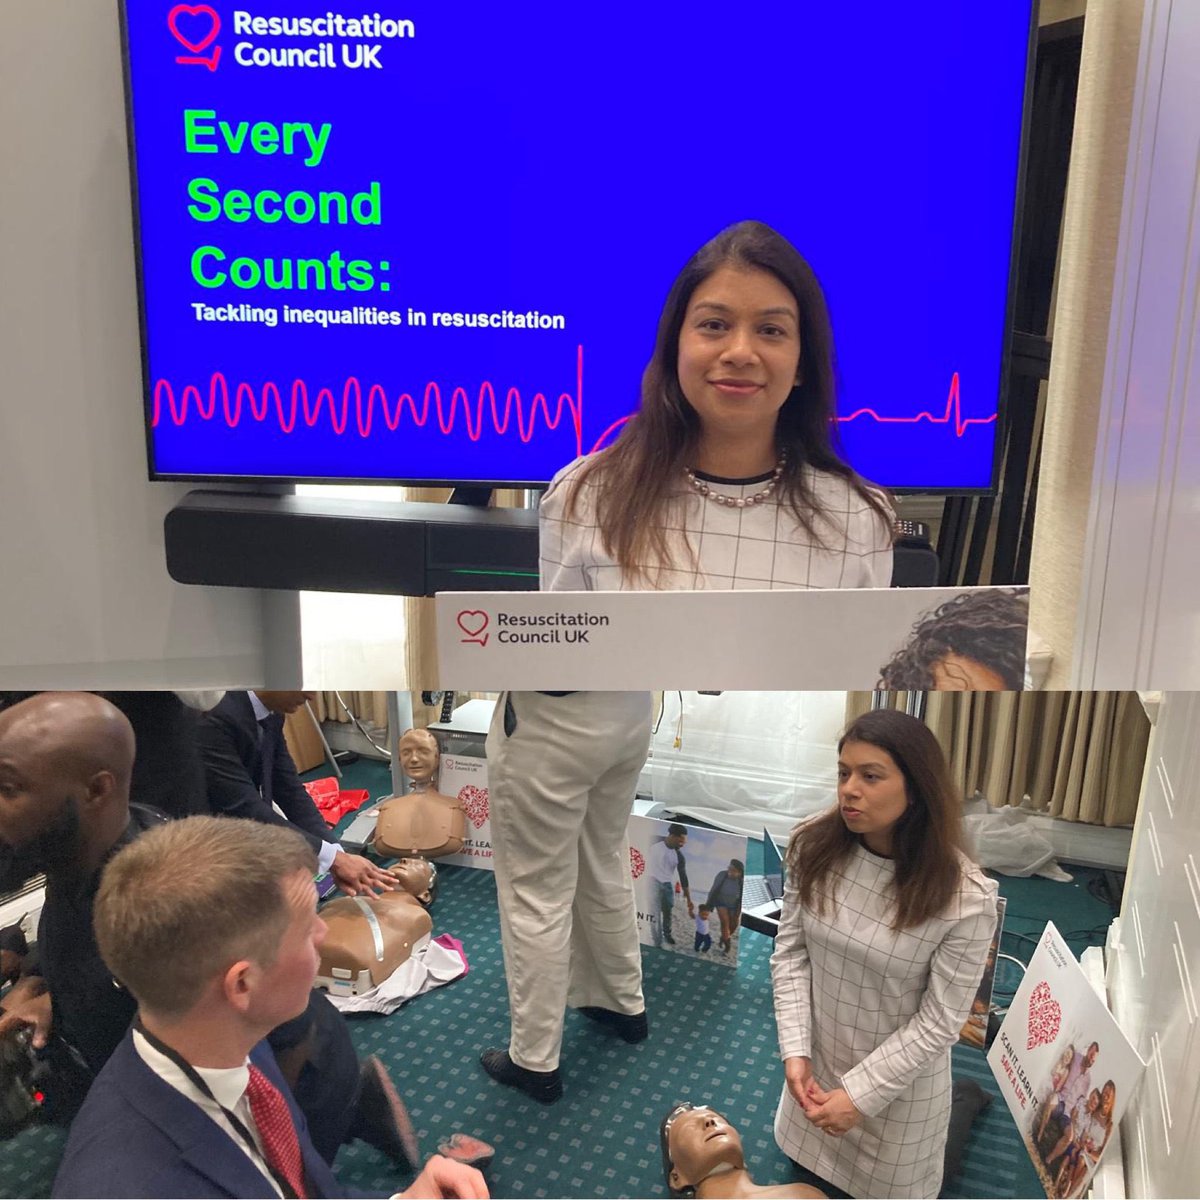 Everyone should know how to practice CPR and use a defibrillator in an emergency, so I was glad to practise my skills with experts from @resuscounciluk. I also spoke to them about heart health and the vital need for widespread CPR training so we can save more lives!